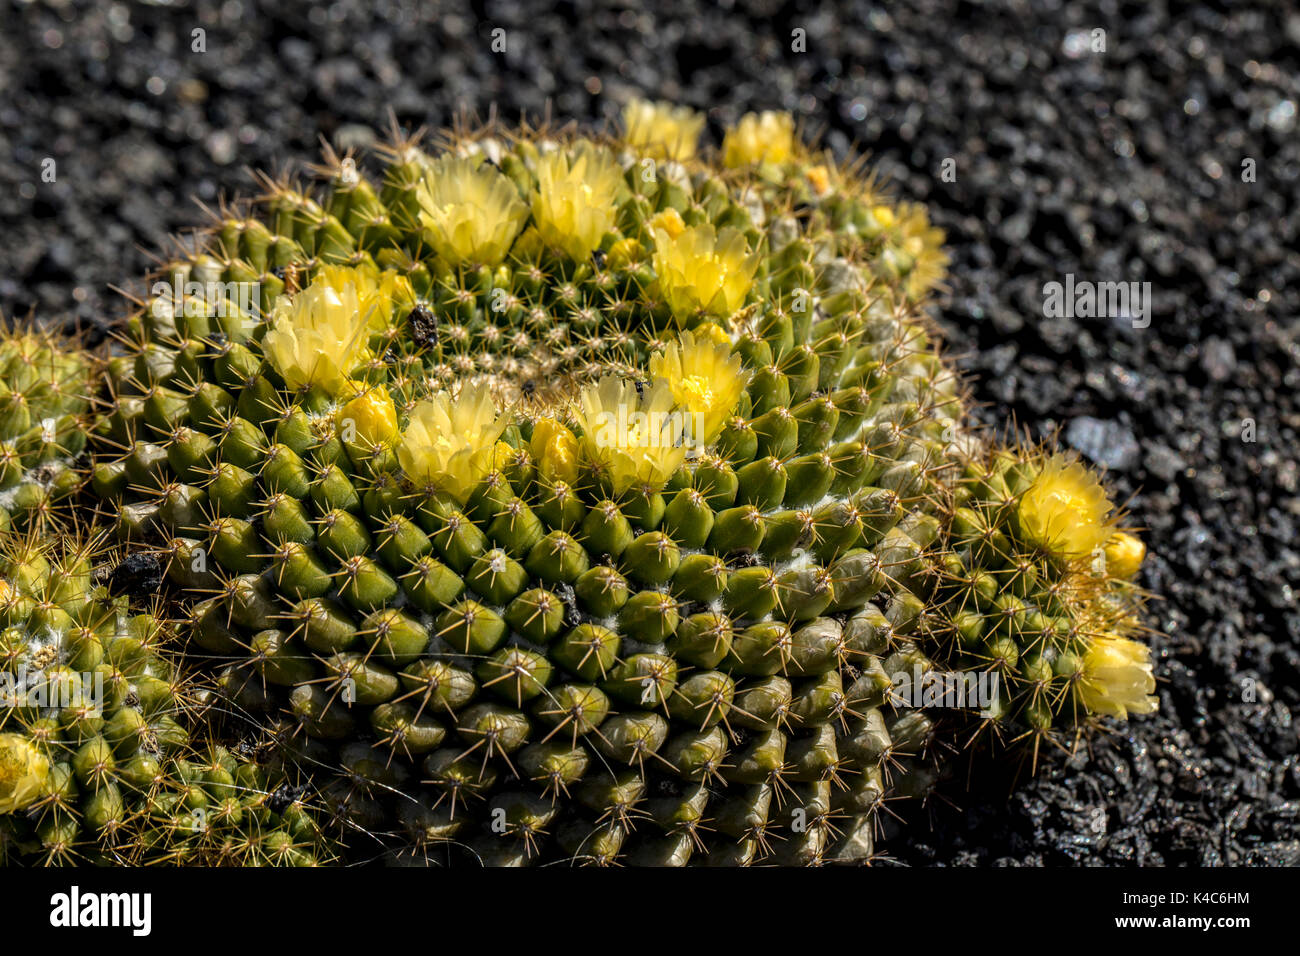 Closeup Of A Flowering Cactus With Yellow Flowers Stock Photo